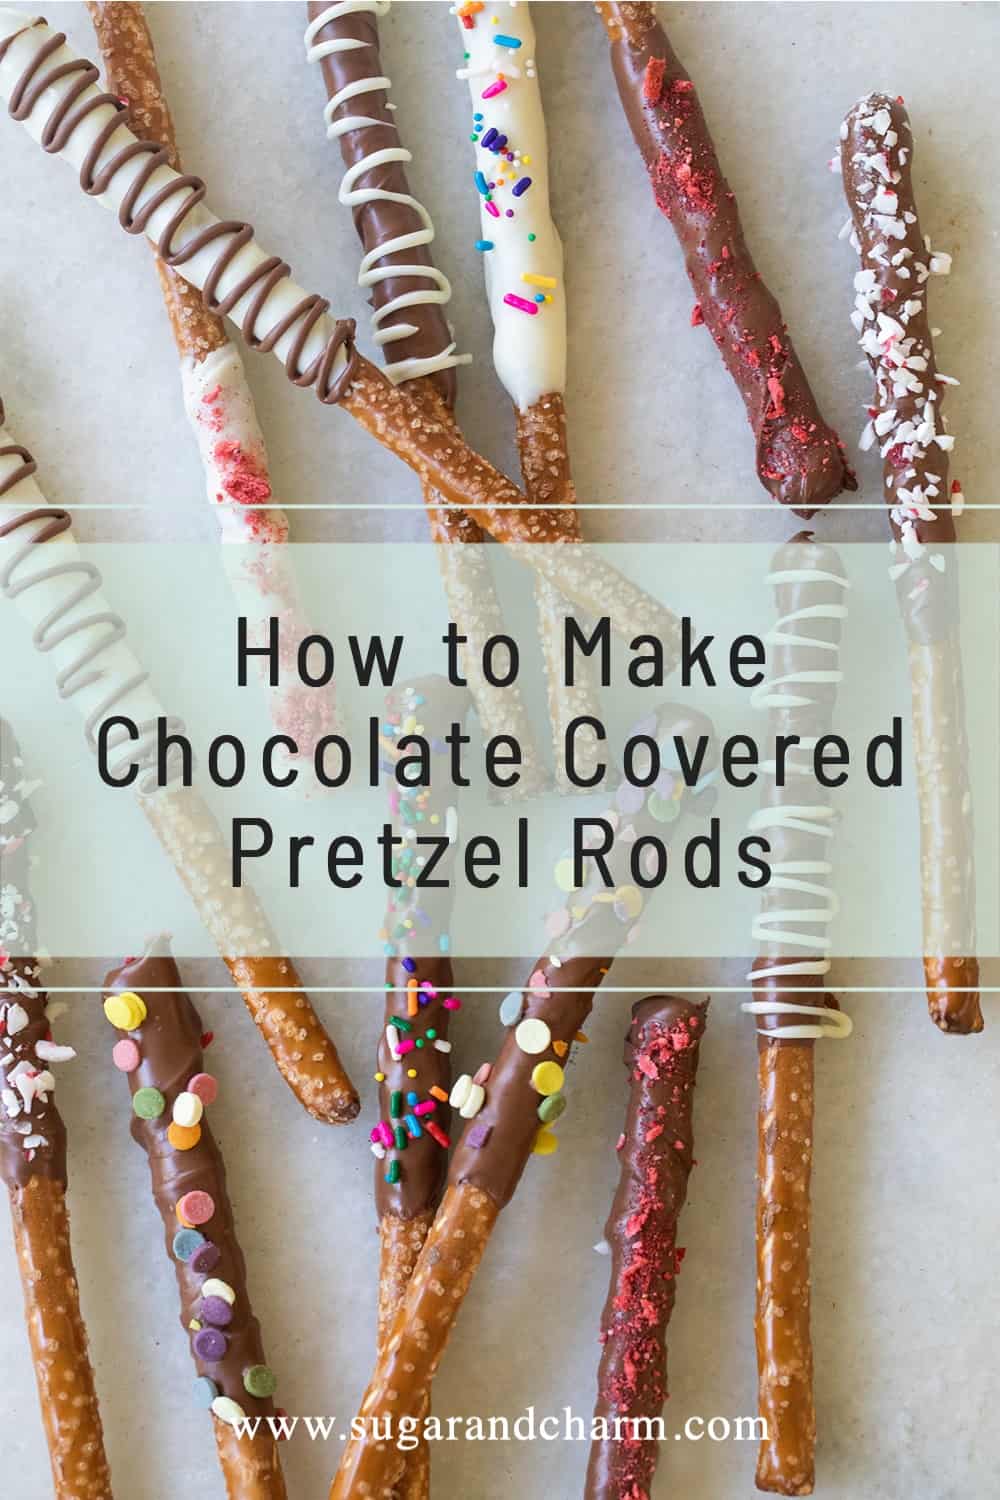 how to make chocolate covered pretzel rod graphic 